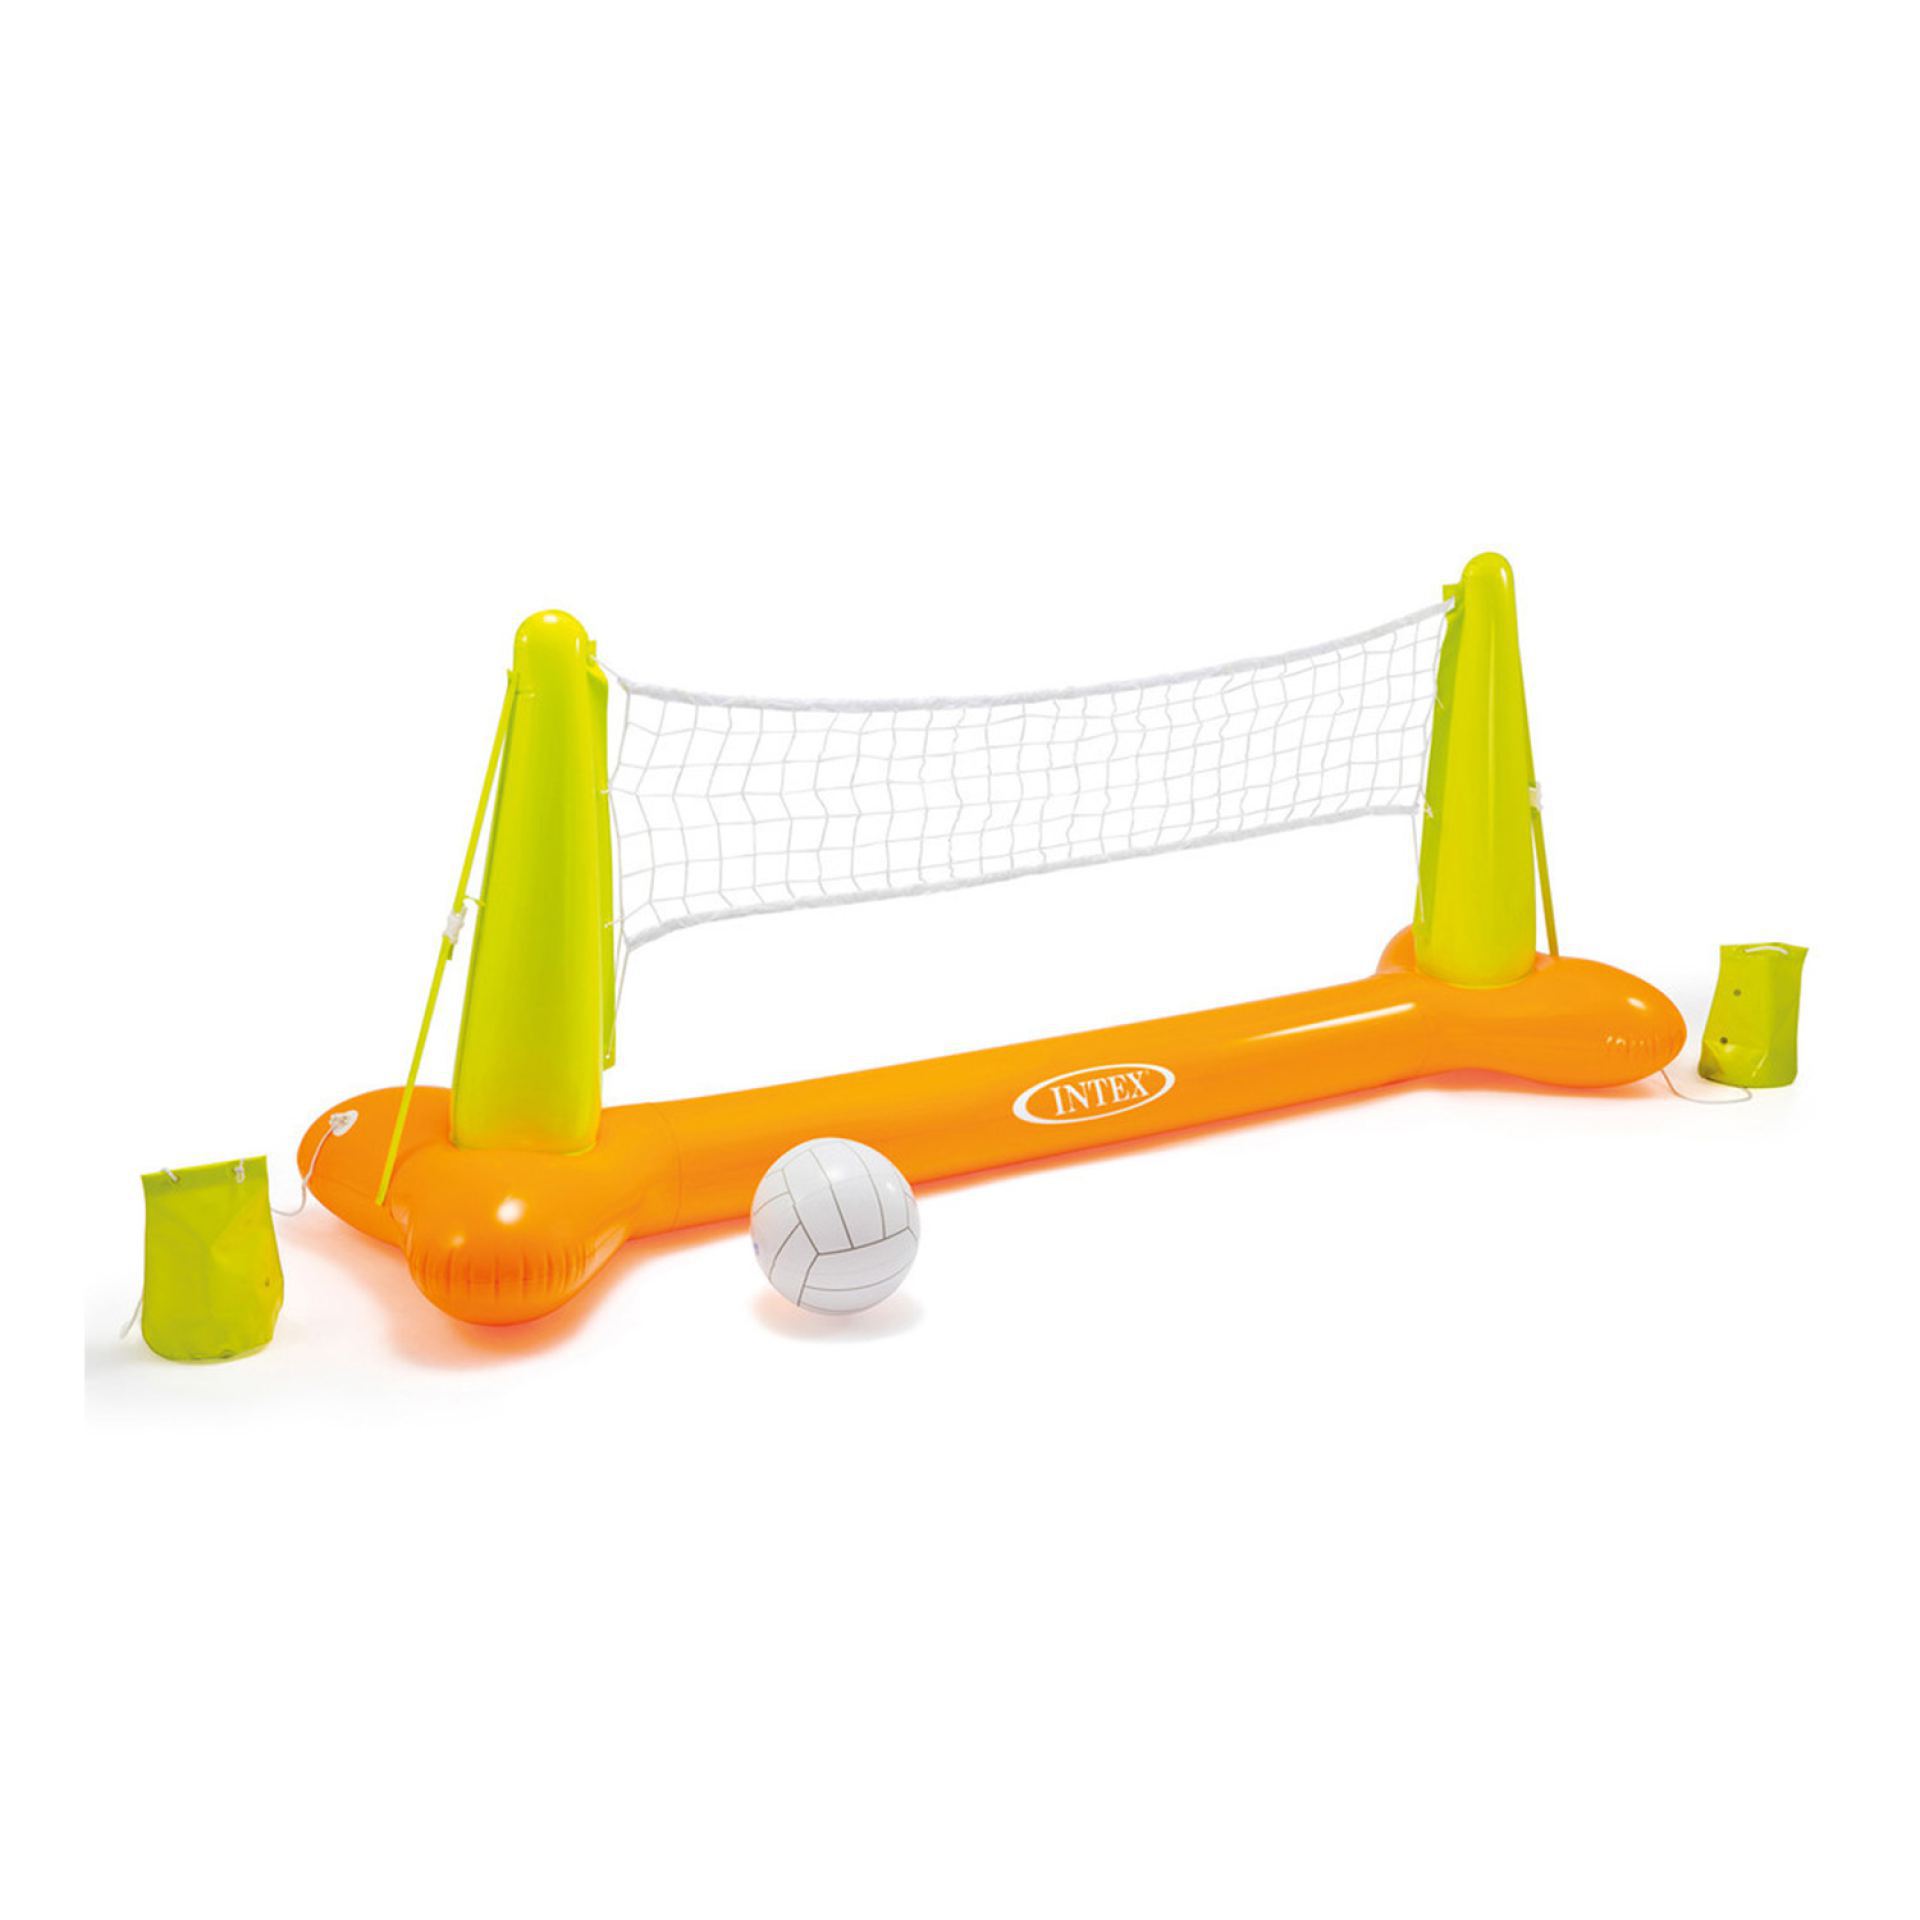 Intex inflatable pool volleyball net